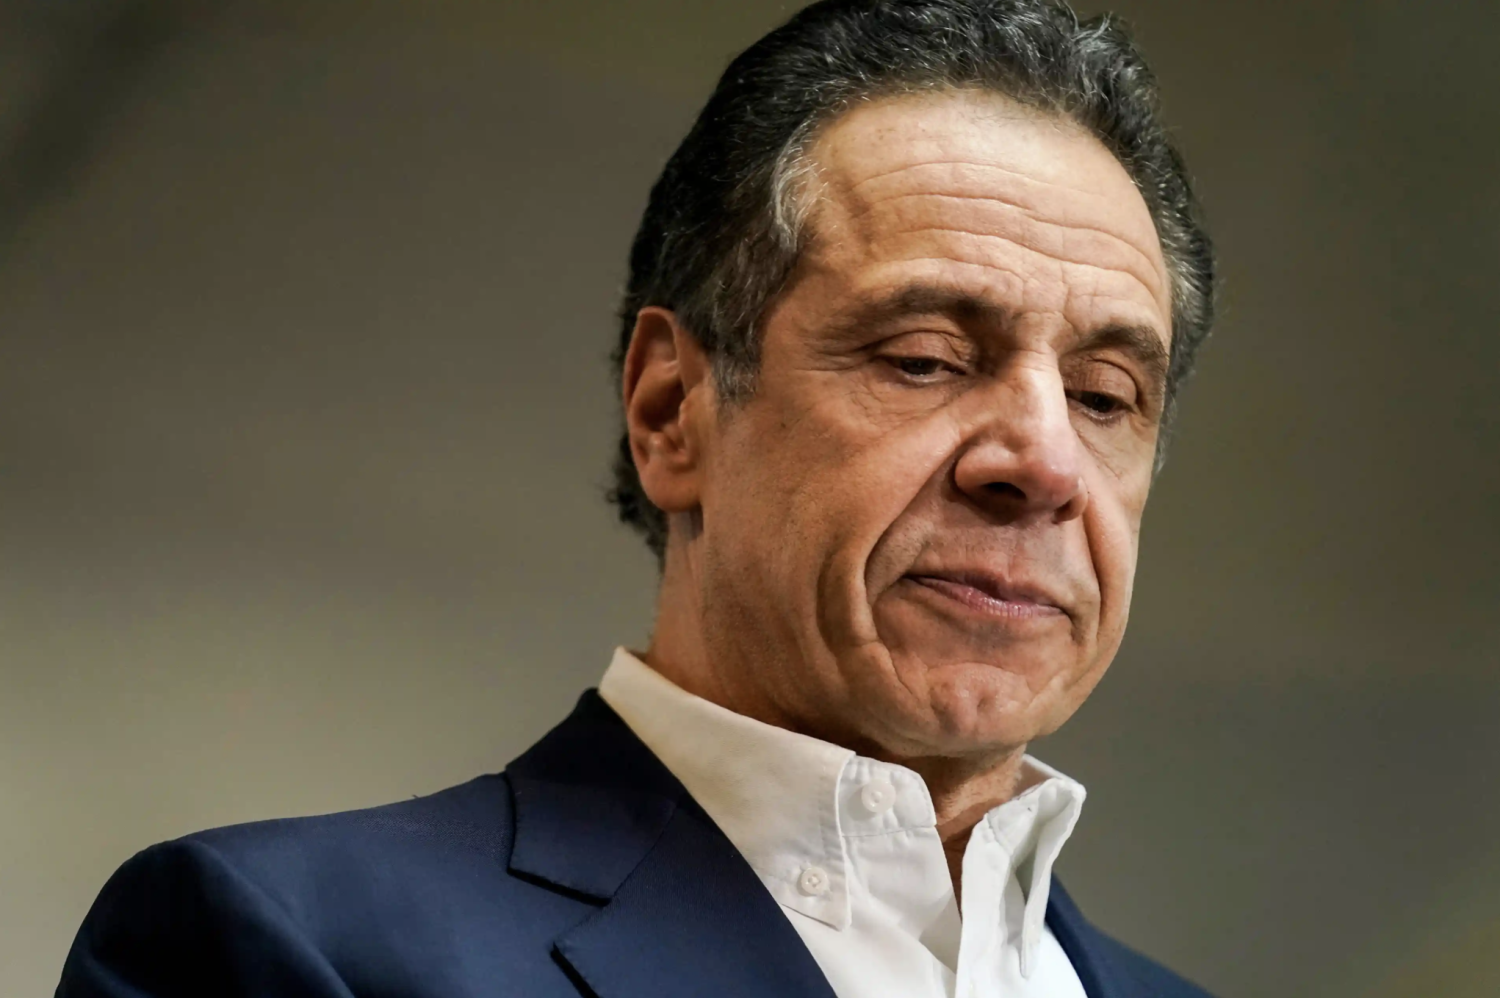 New York governor Andrew Cuomo in March 2021. Photograph: Seth Wenig/Pool via Getty Images